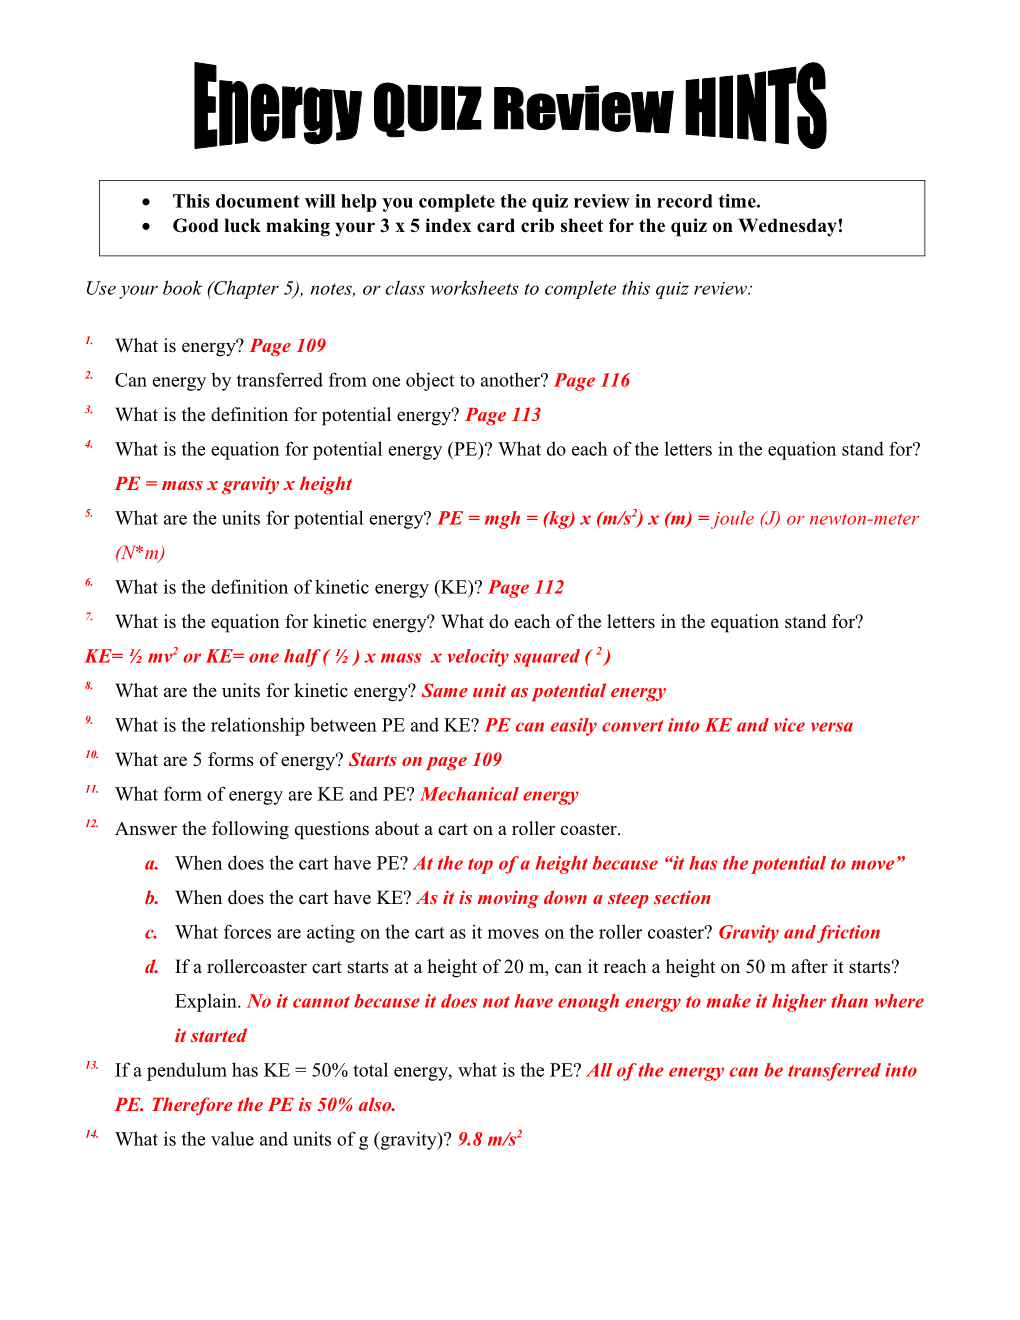 Use Your Book (Chapter 5), Notes, Or Class Worksheets to Complete This Quiz Review